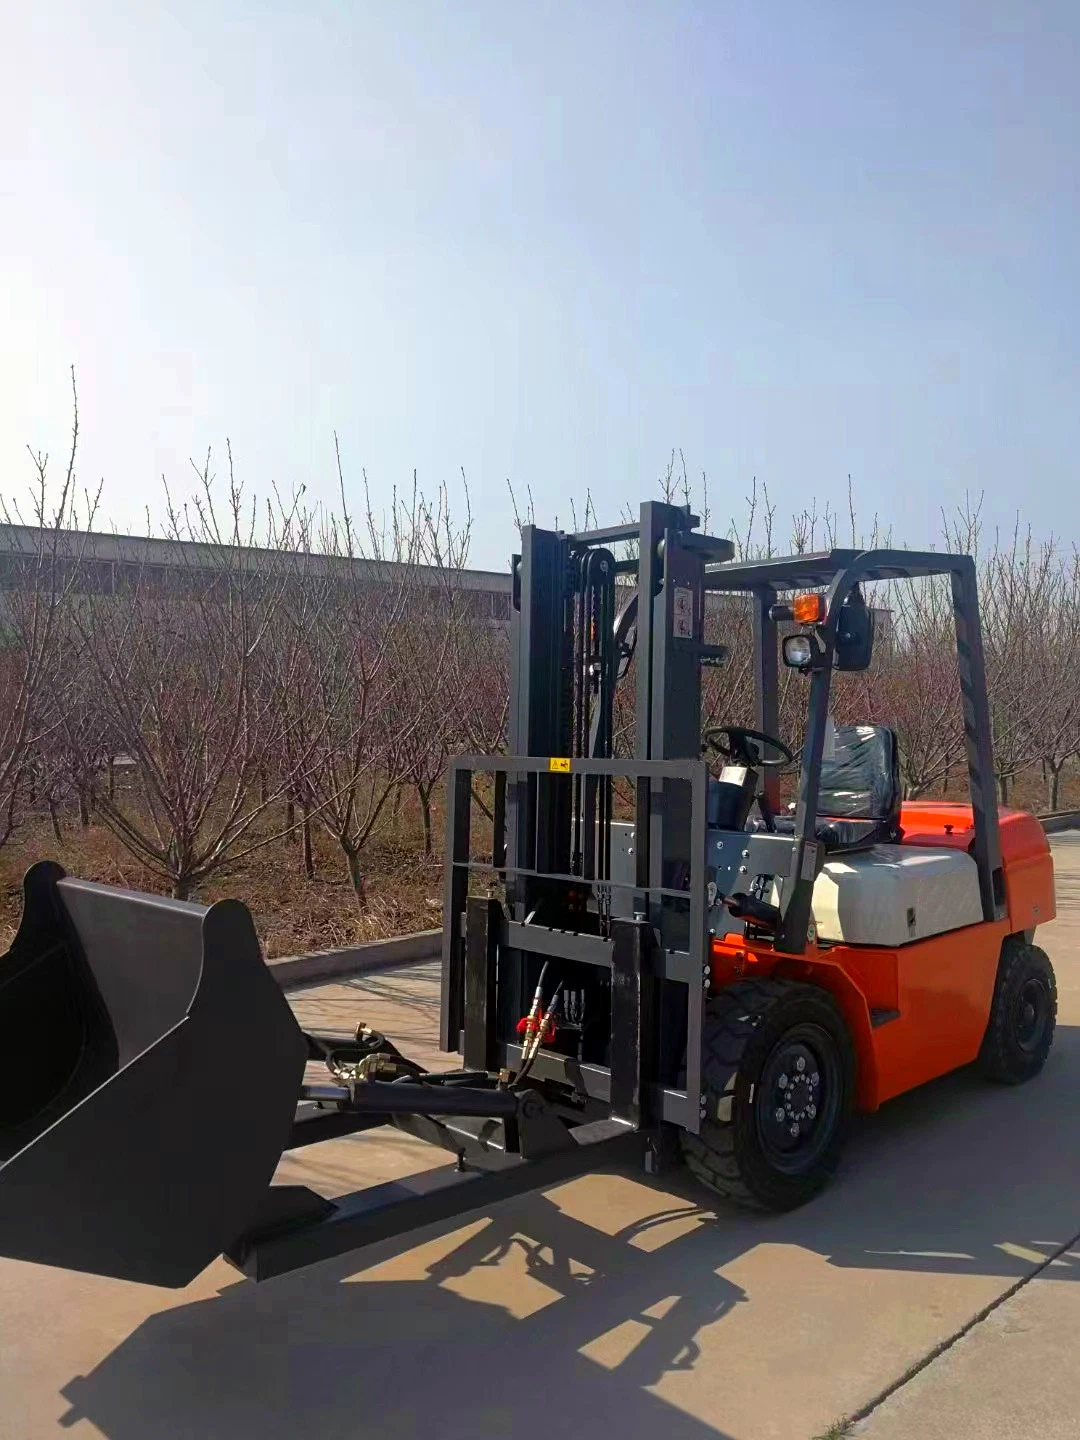 Diesel Counterbalanced Forklift Truck Used Forklift Trucks in Stock Diesel Forklift Rough Terrain Forklift Mini Forklift Lithium Battery Electric Forklift